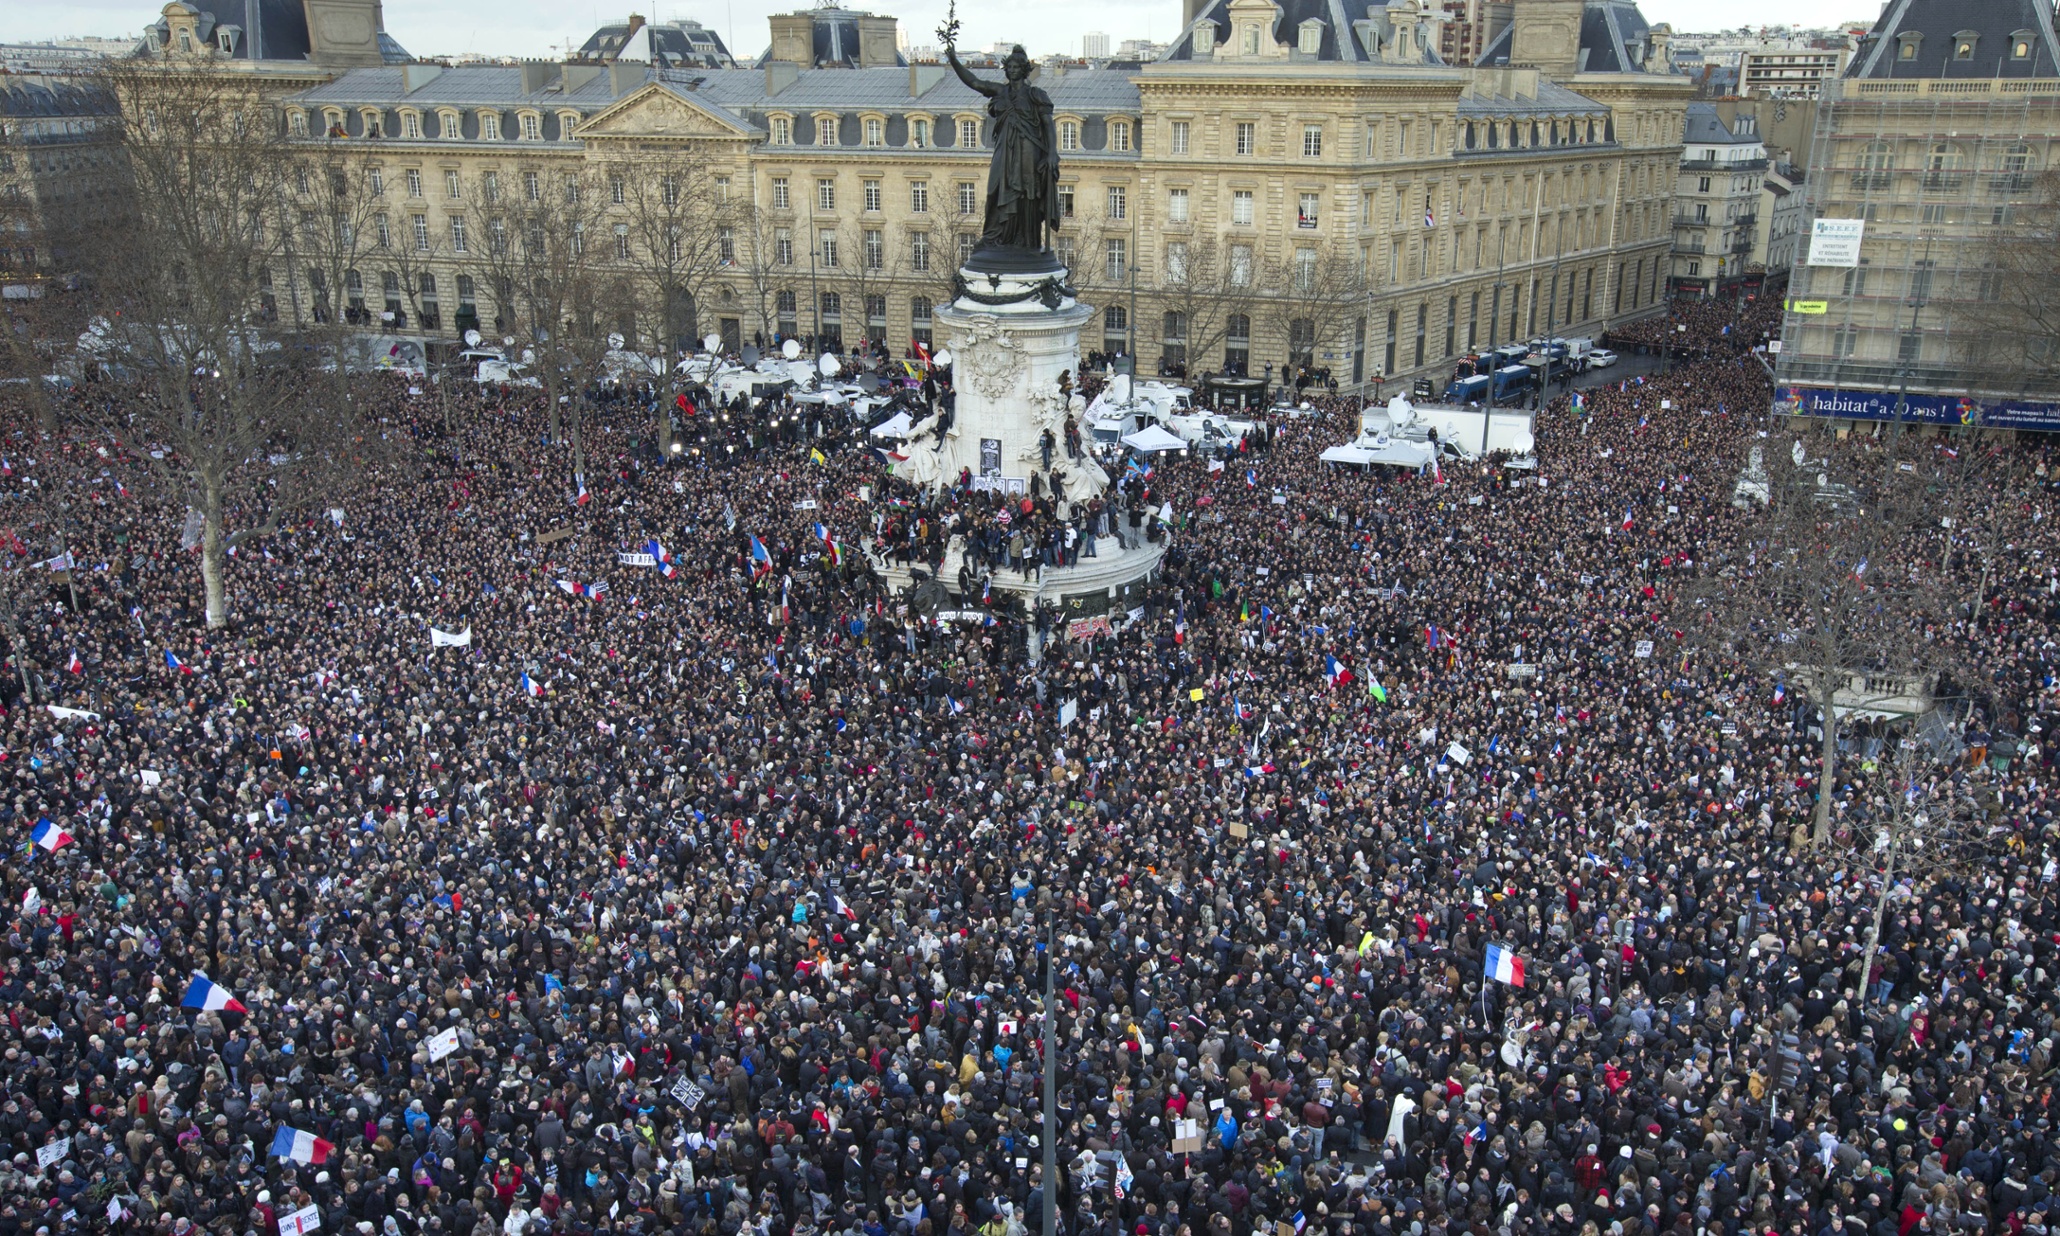 Huge crowds gather for Paris unity rally as it happened World news